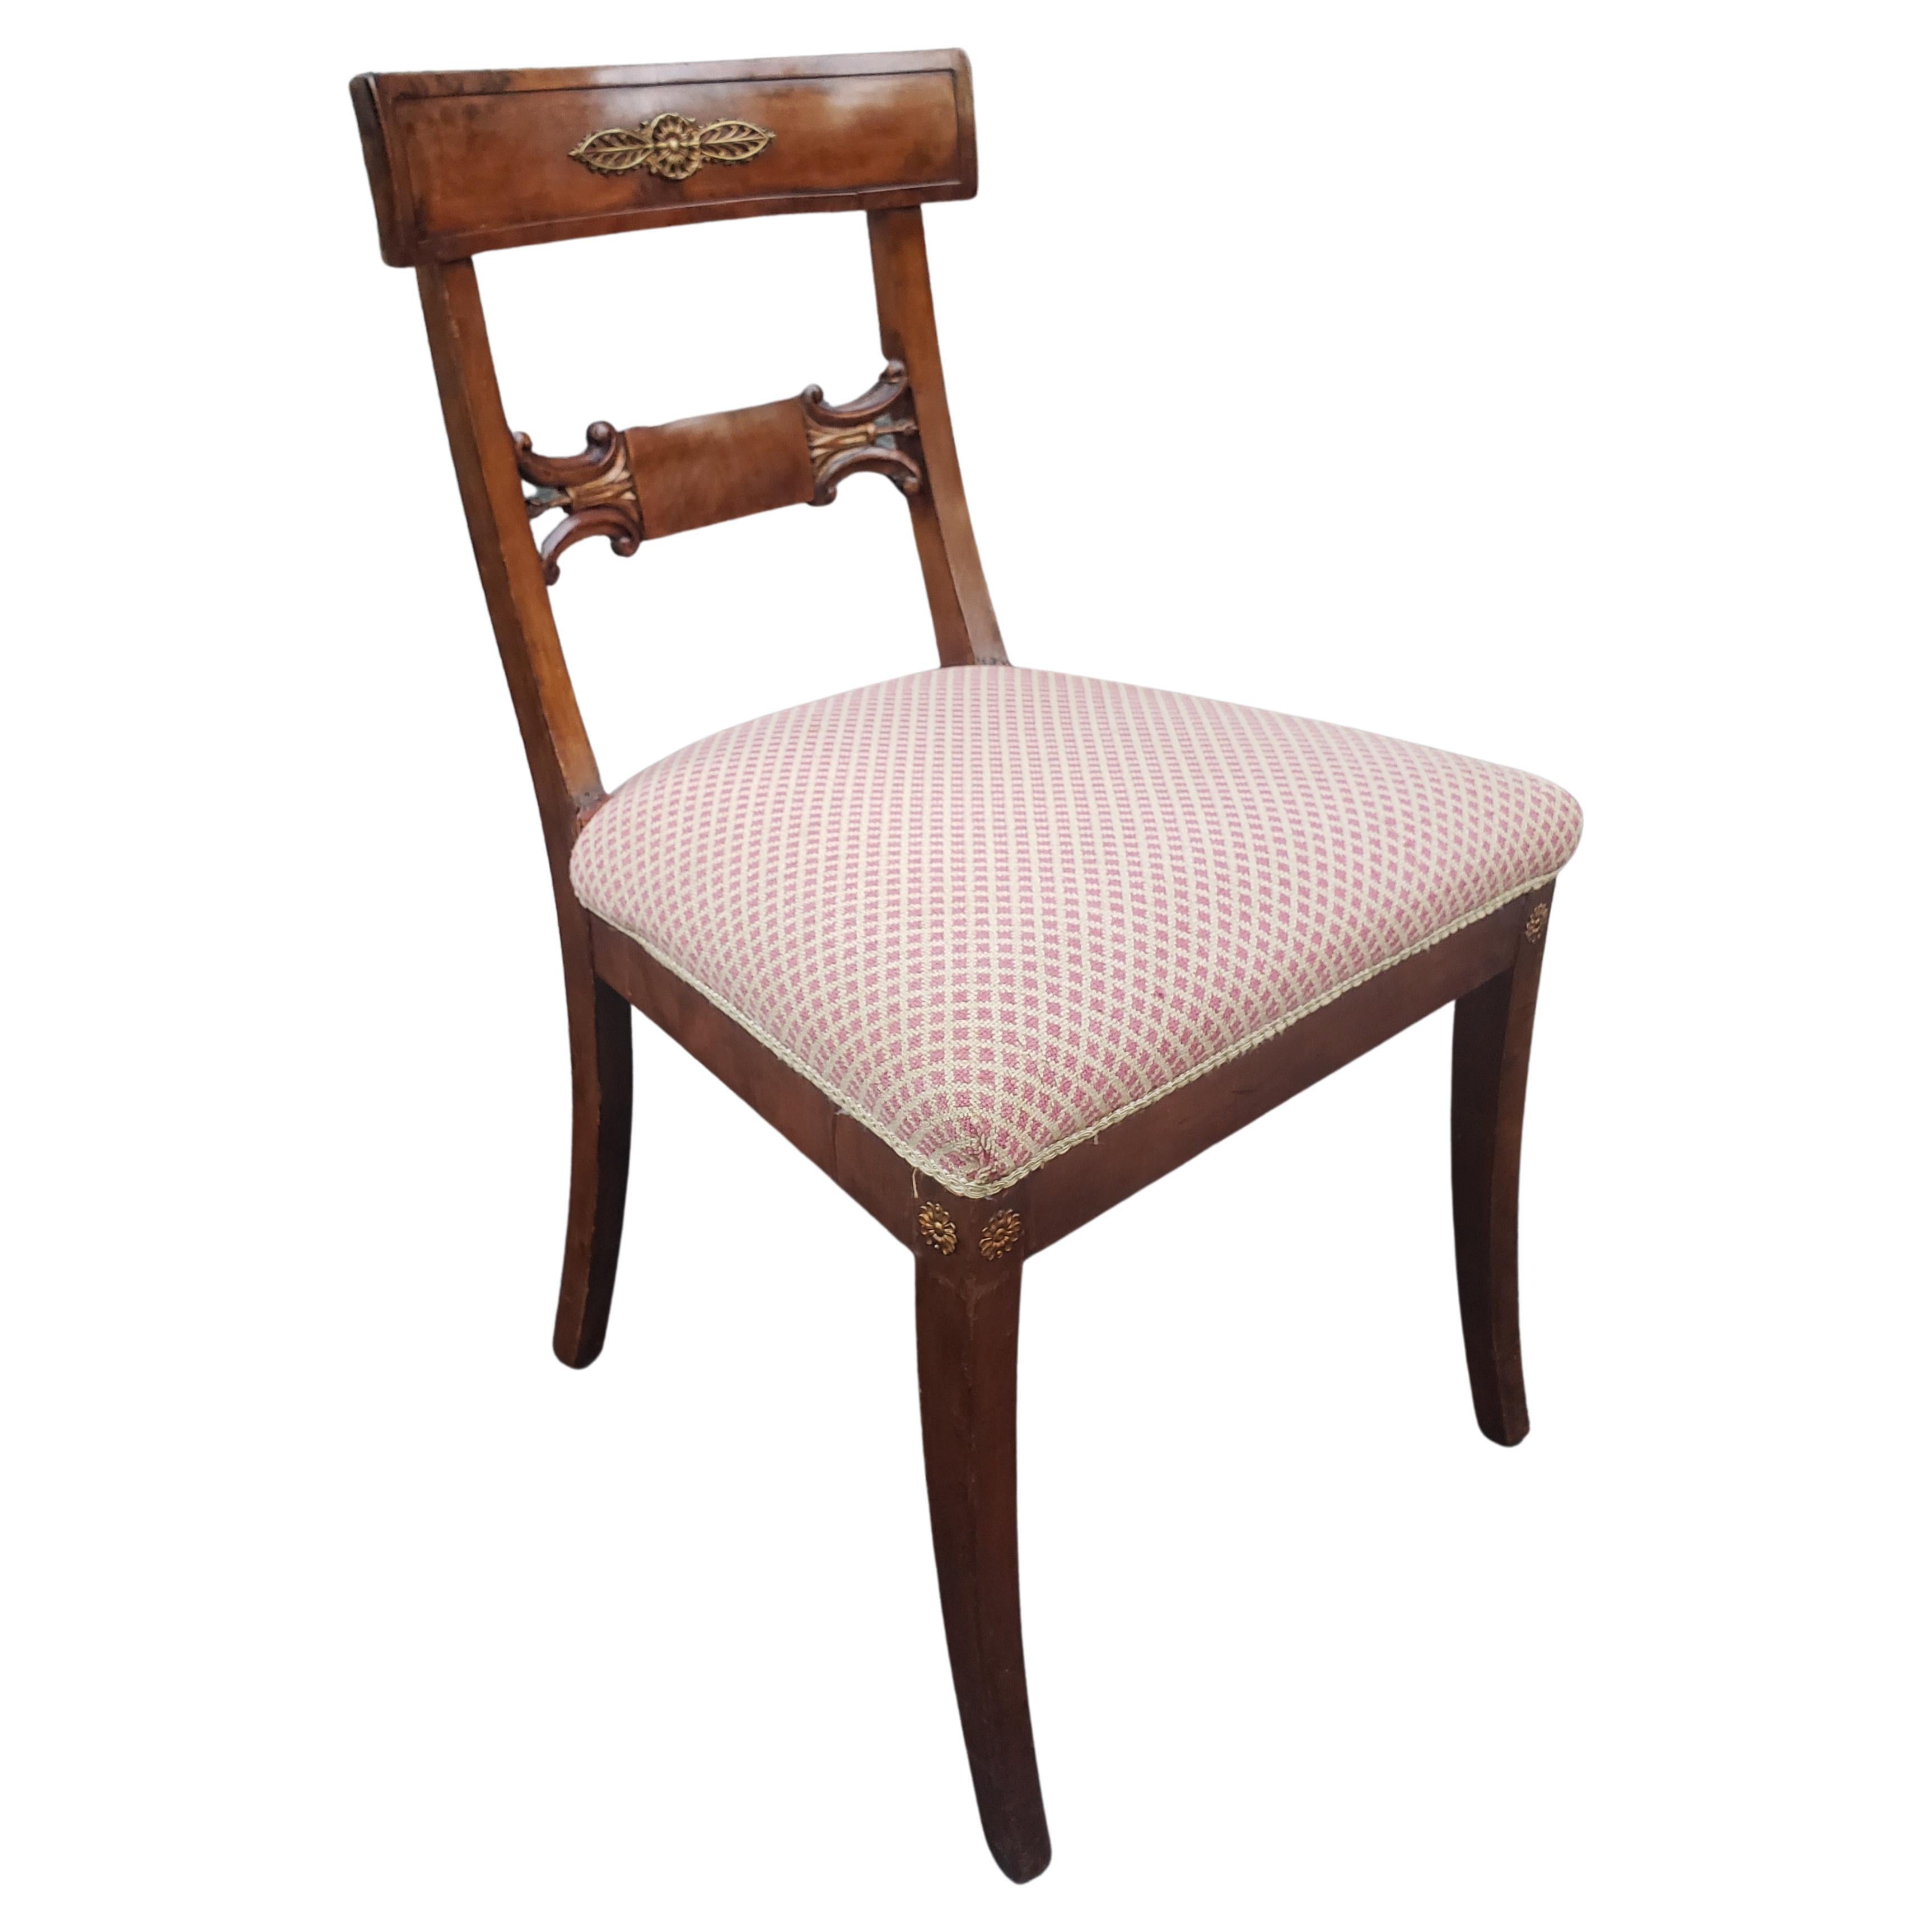 American 19th Century Empire Ormolu Mounted, Partial Gilt Mahogany & Upholstered Chair For Sale